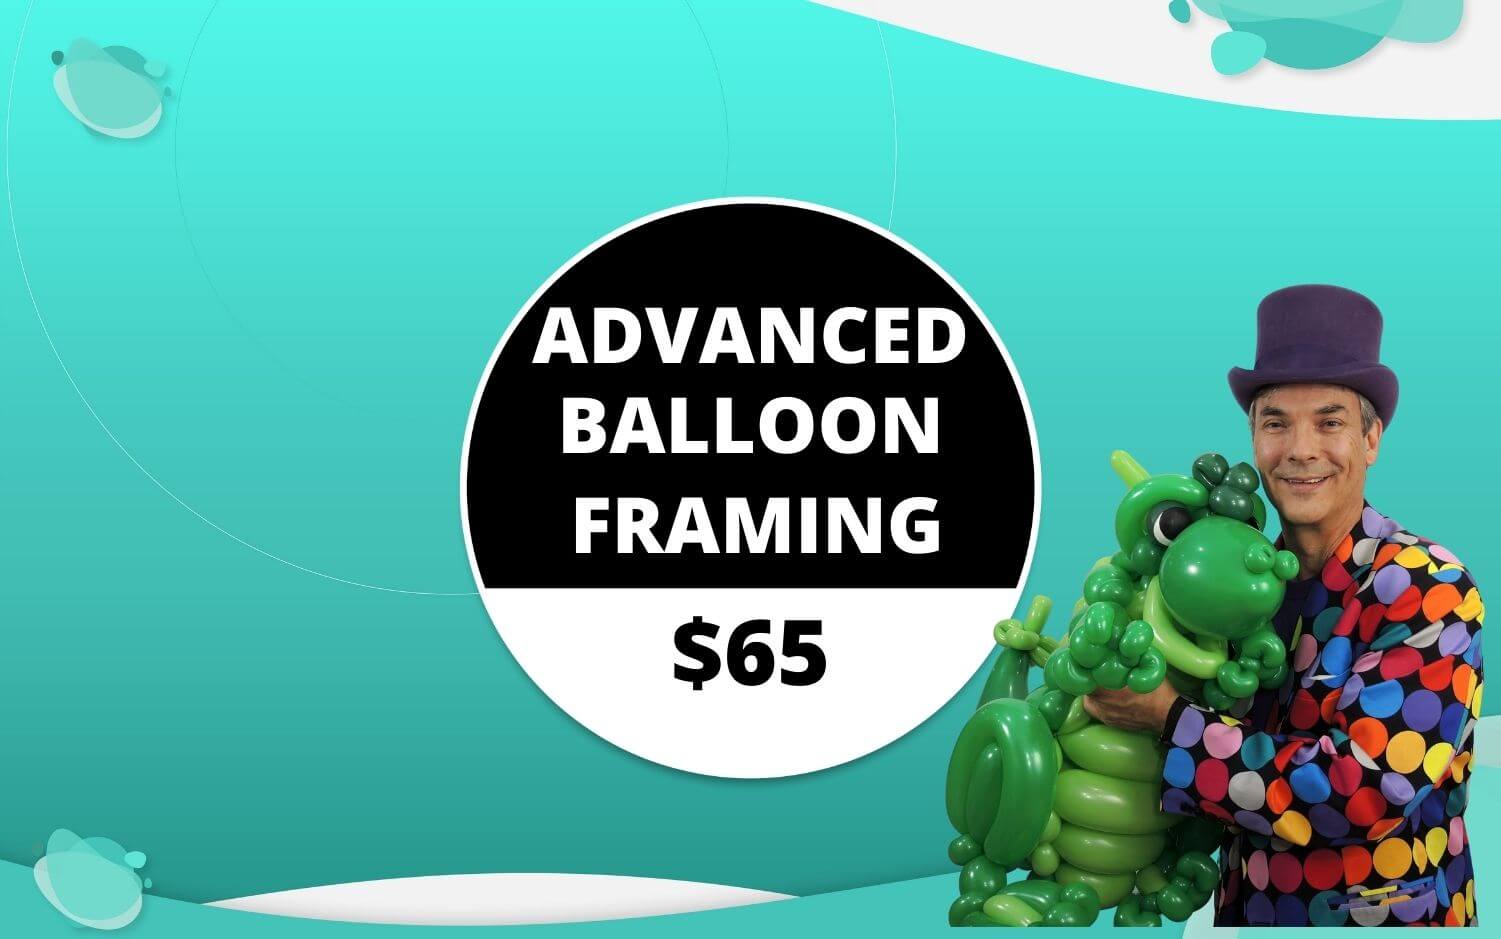 Advanced Balloon Framing by Glen LaValley